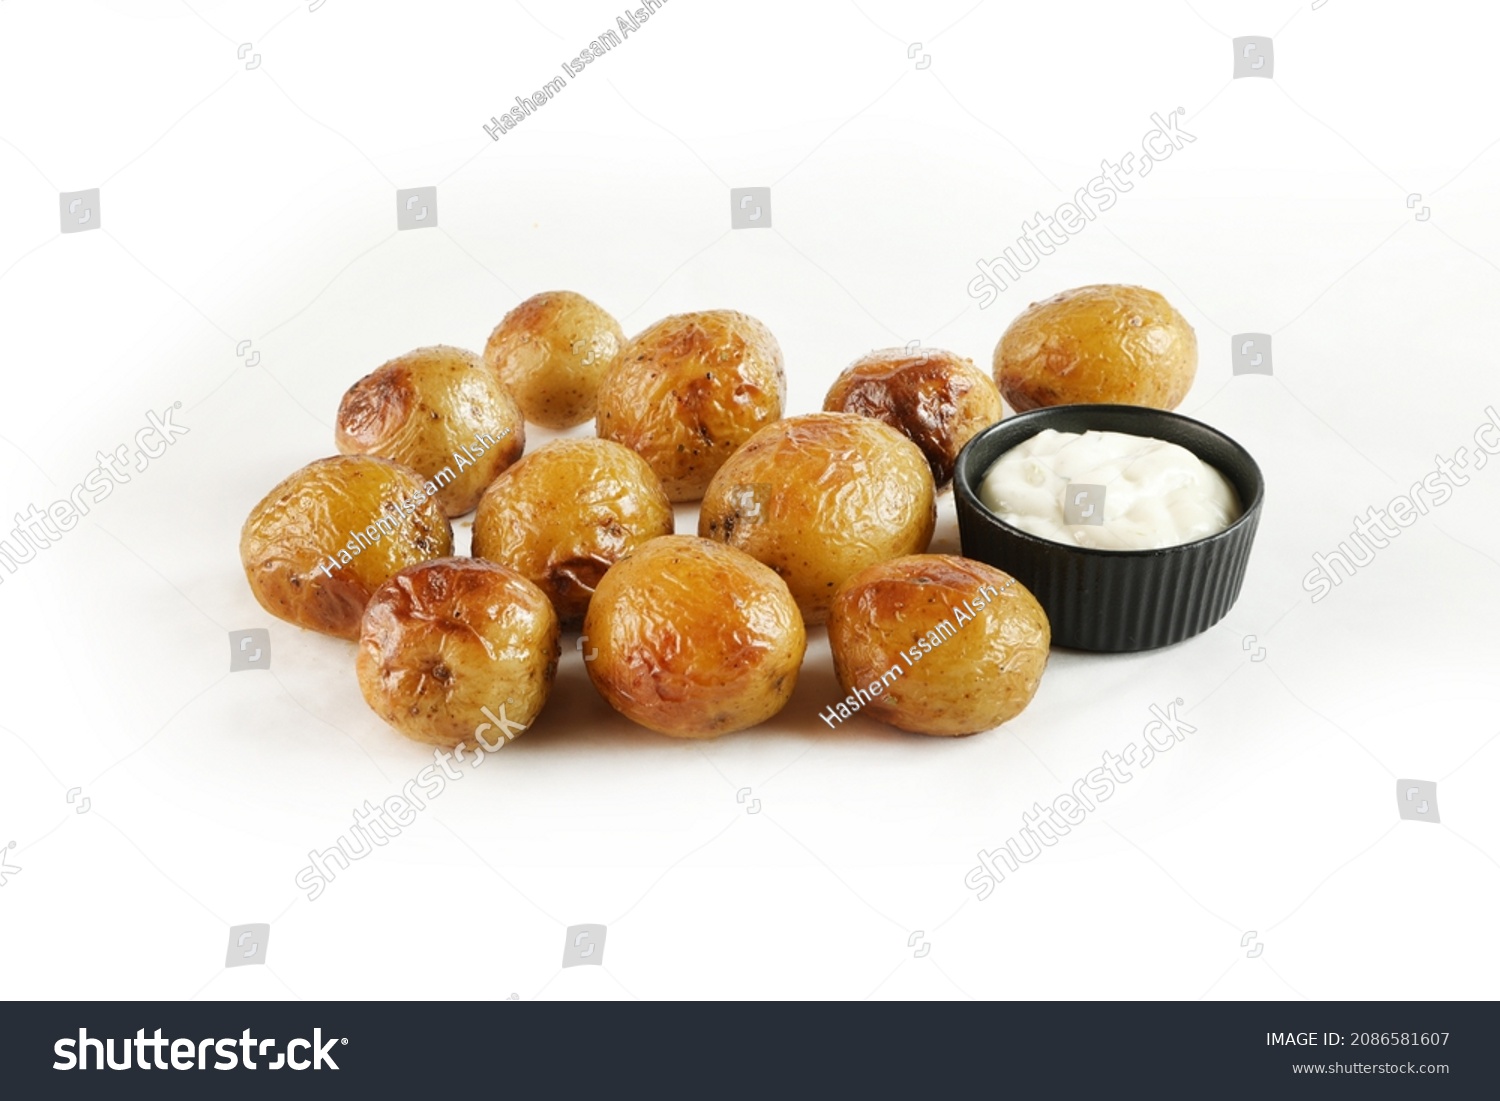 Young small potatoes baked with garlic, thyme and sea salt on white background 
 #2086581607